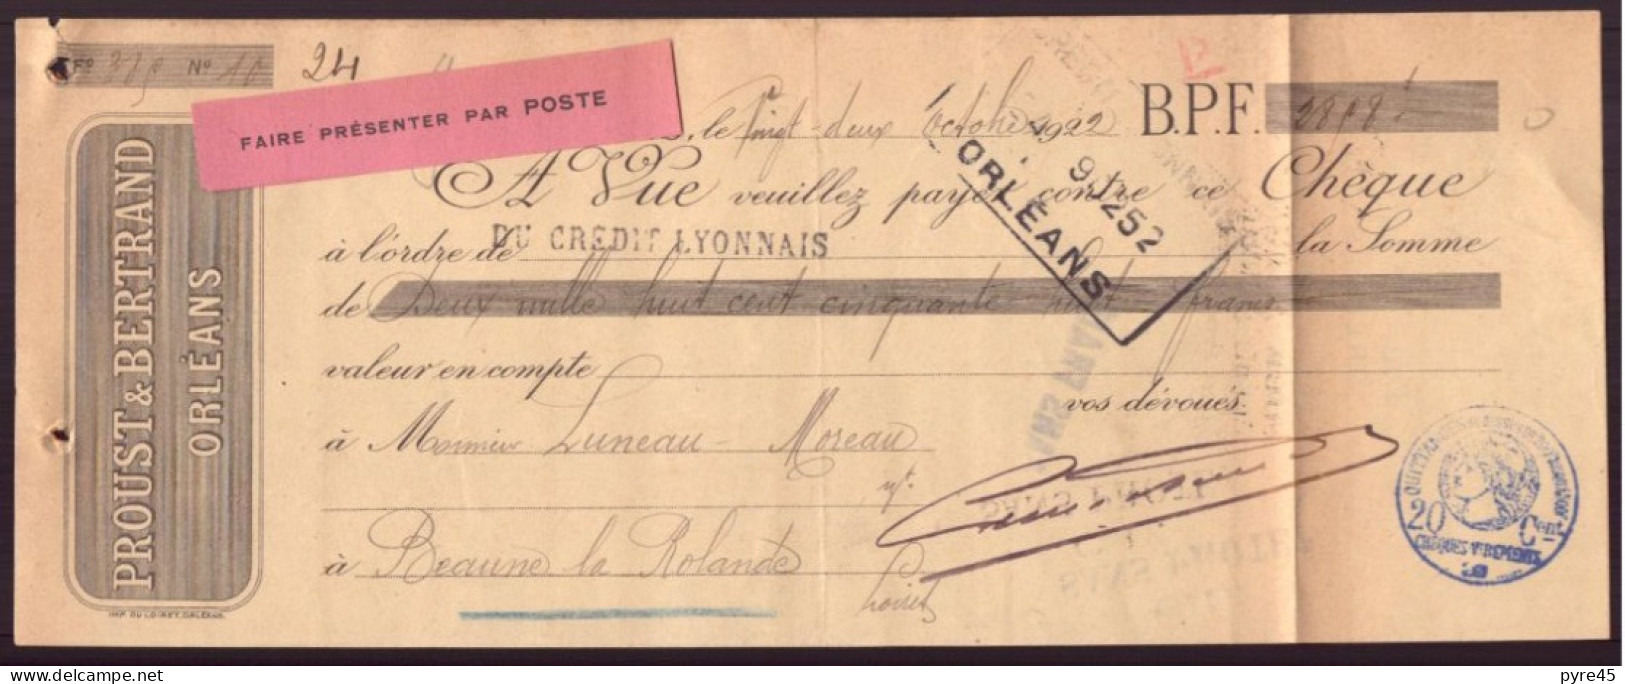 CHEQUE DU 22 / 10 / 1922 PROUST BERTRAND A ORLEANS - Cheques En Traveller's Cheques